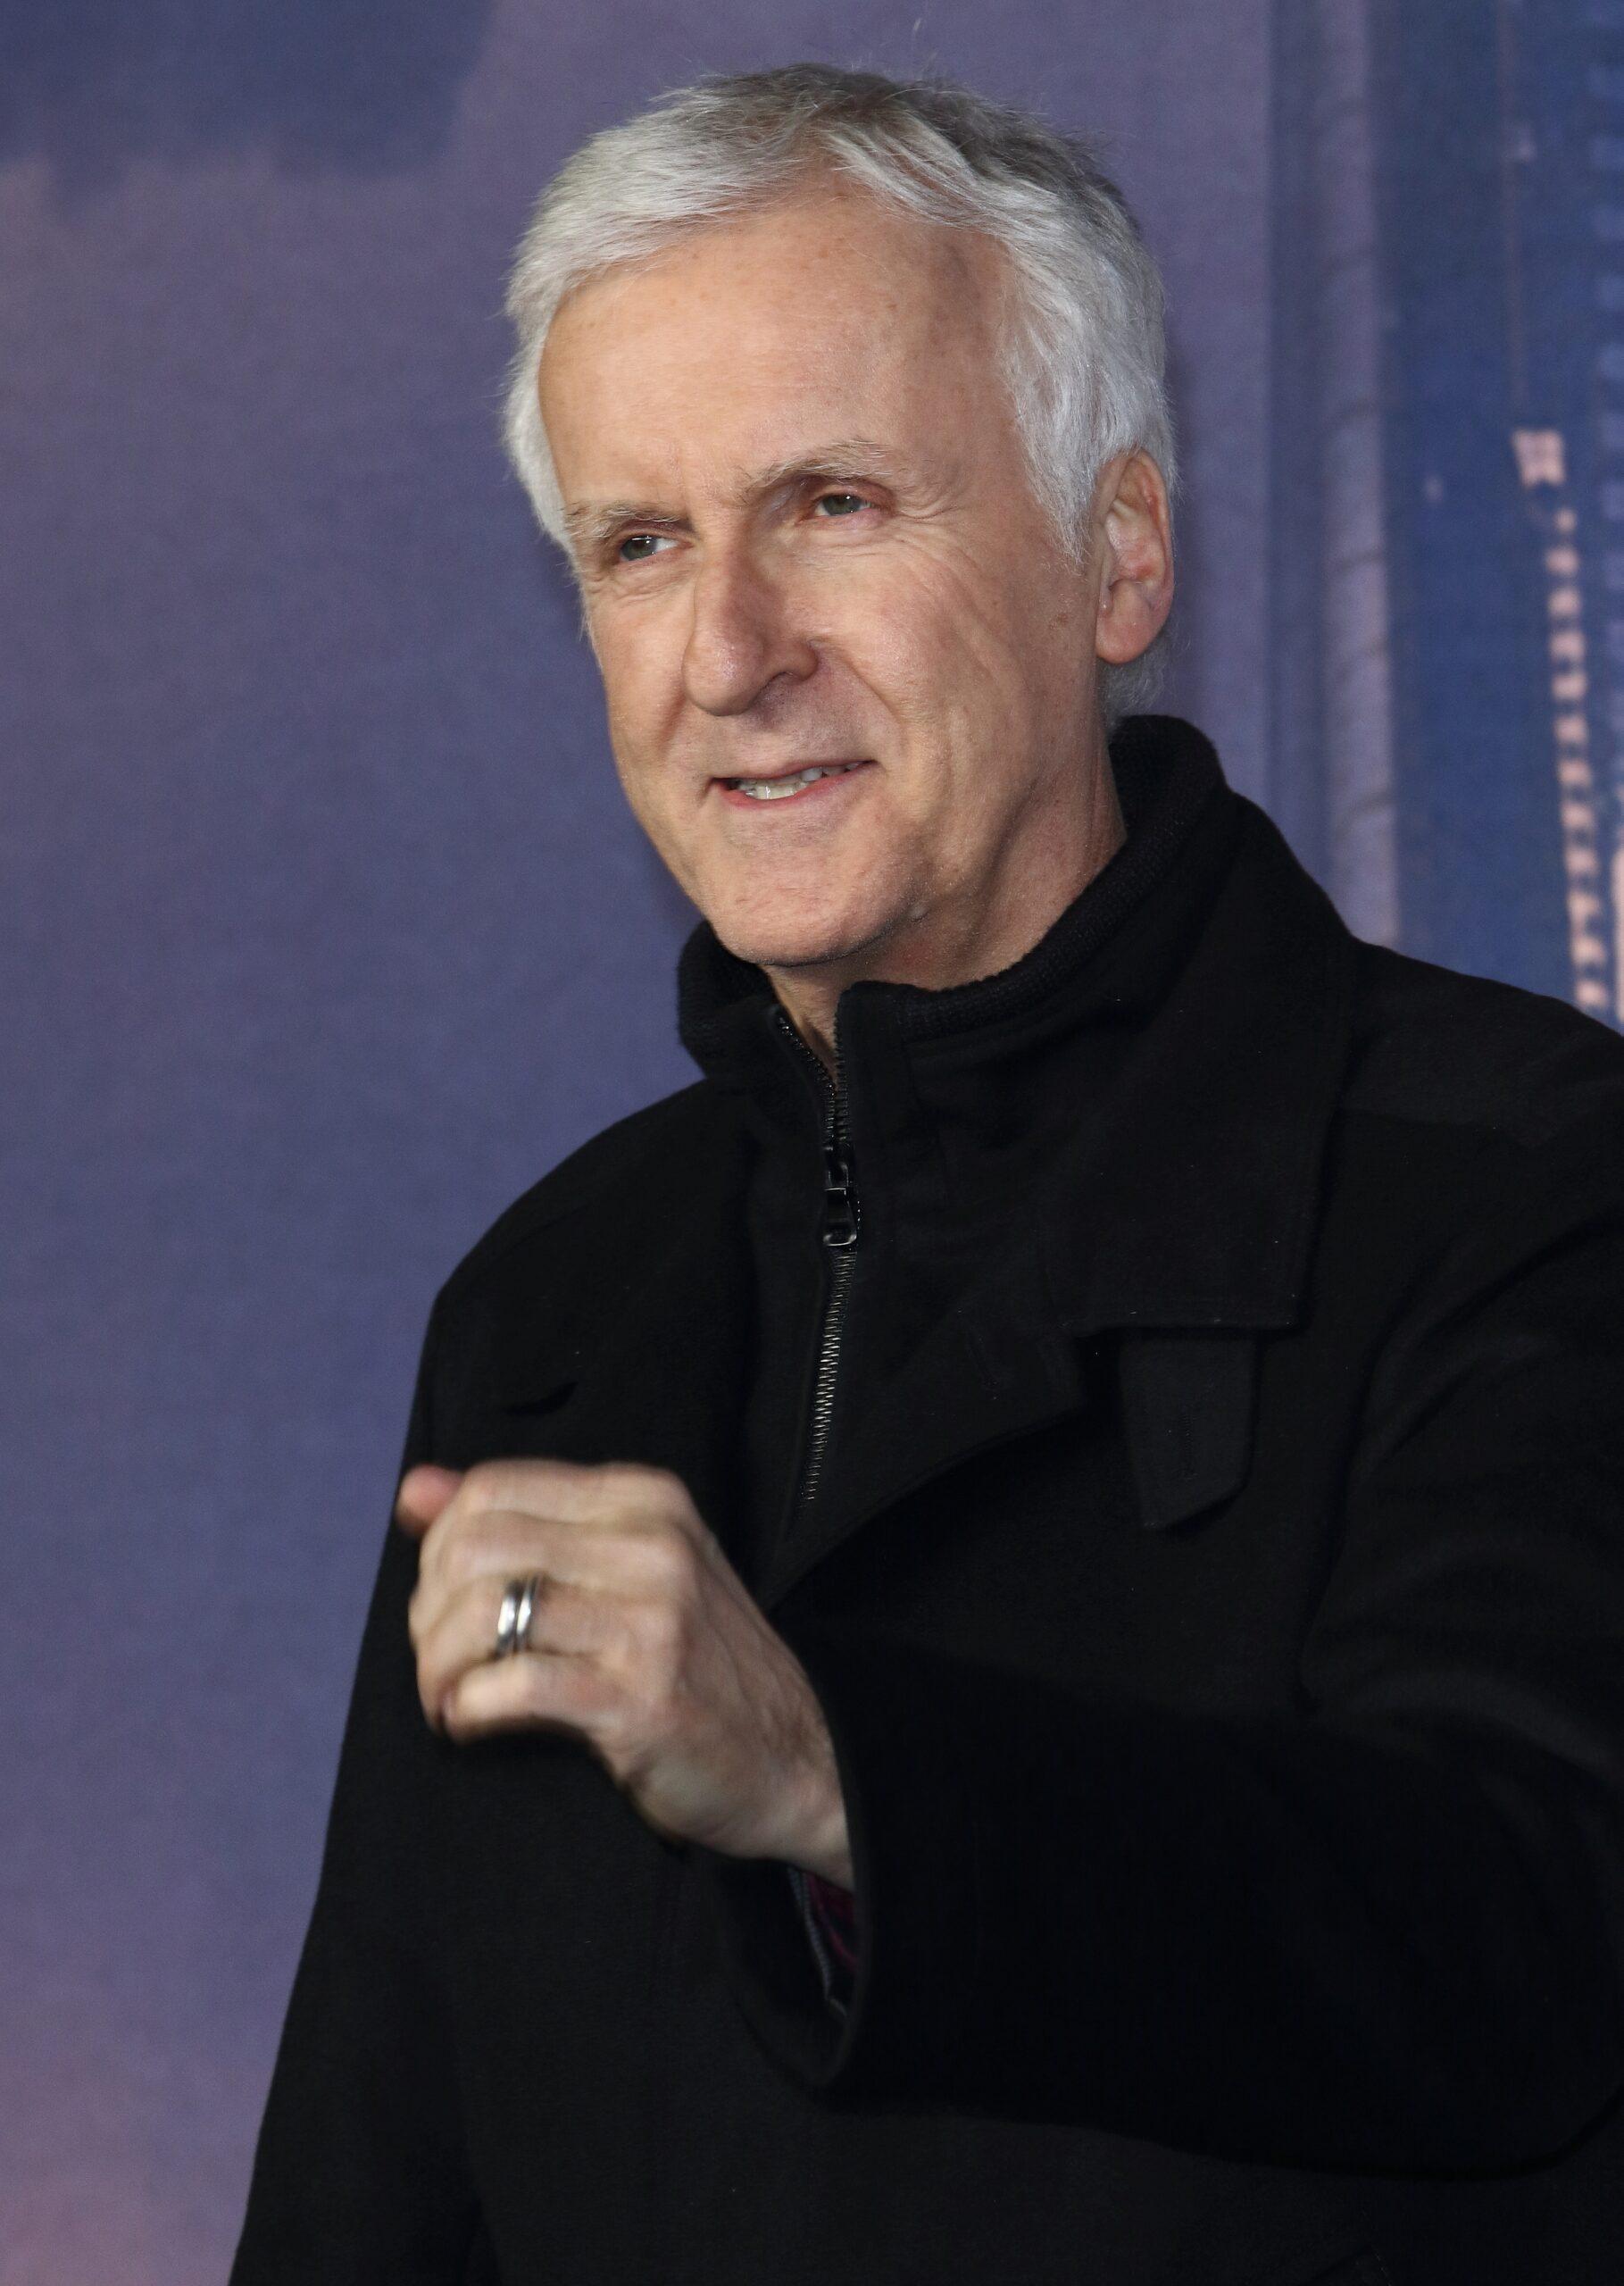 James Cameron Recounts Scary Near-Death Experience While Filming His 1989 Movie 'The Abyss'